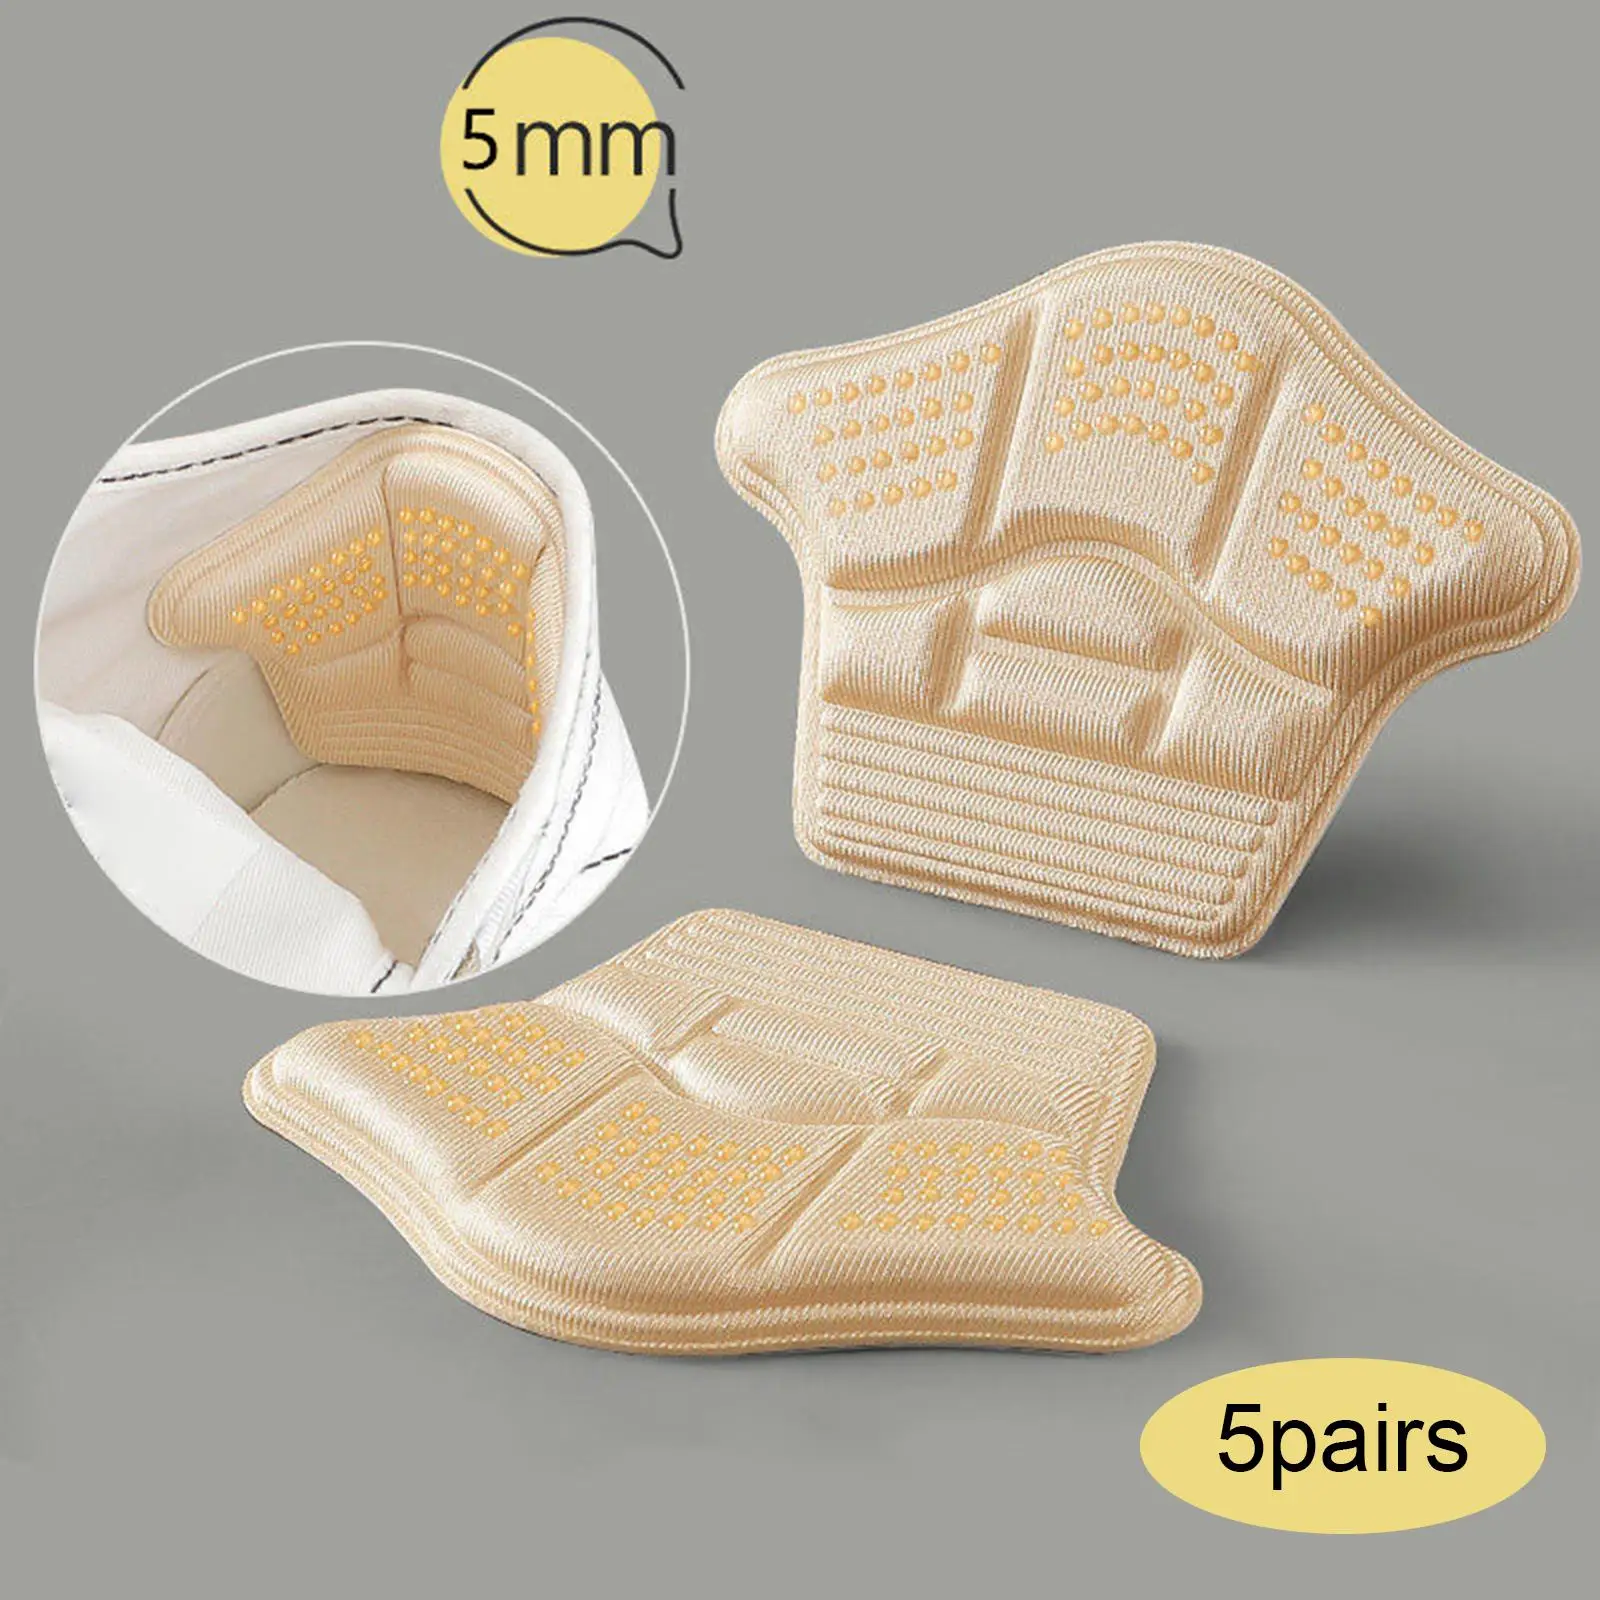 Heel Cushion Pads Shoe Inserts Insoles Protector for Preventing Heel Pains Sport Shoes Pain Relief Antiwear Feet Pad Protector